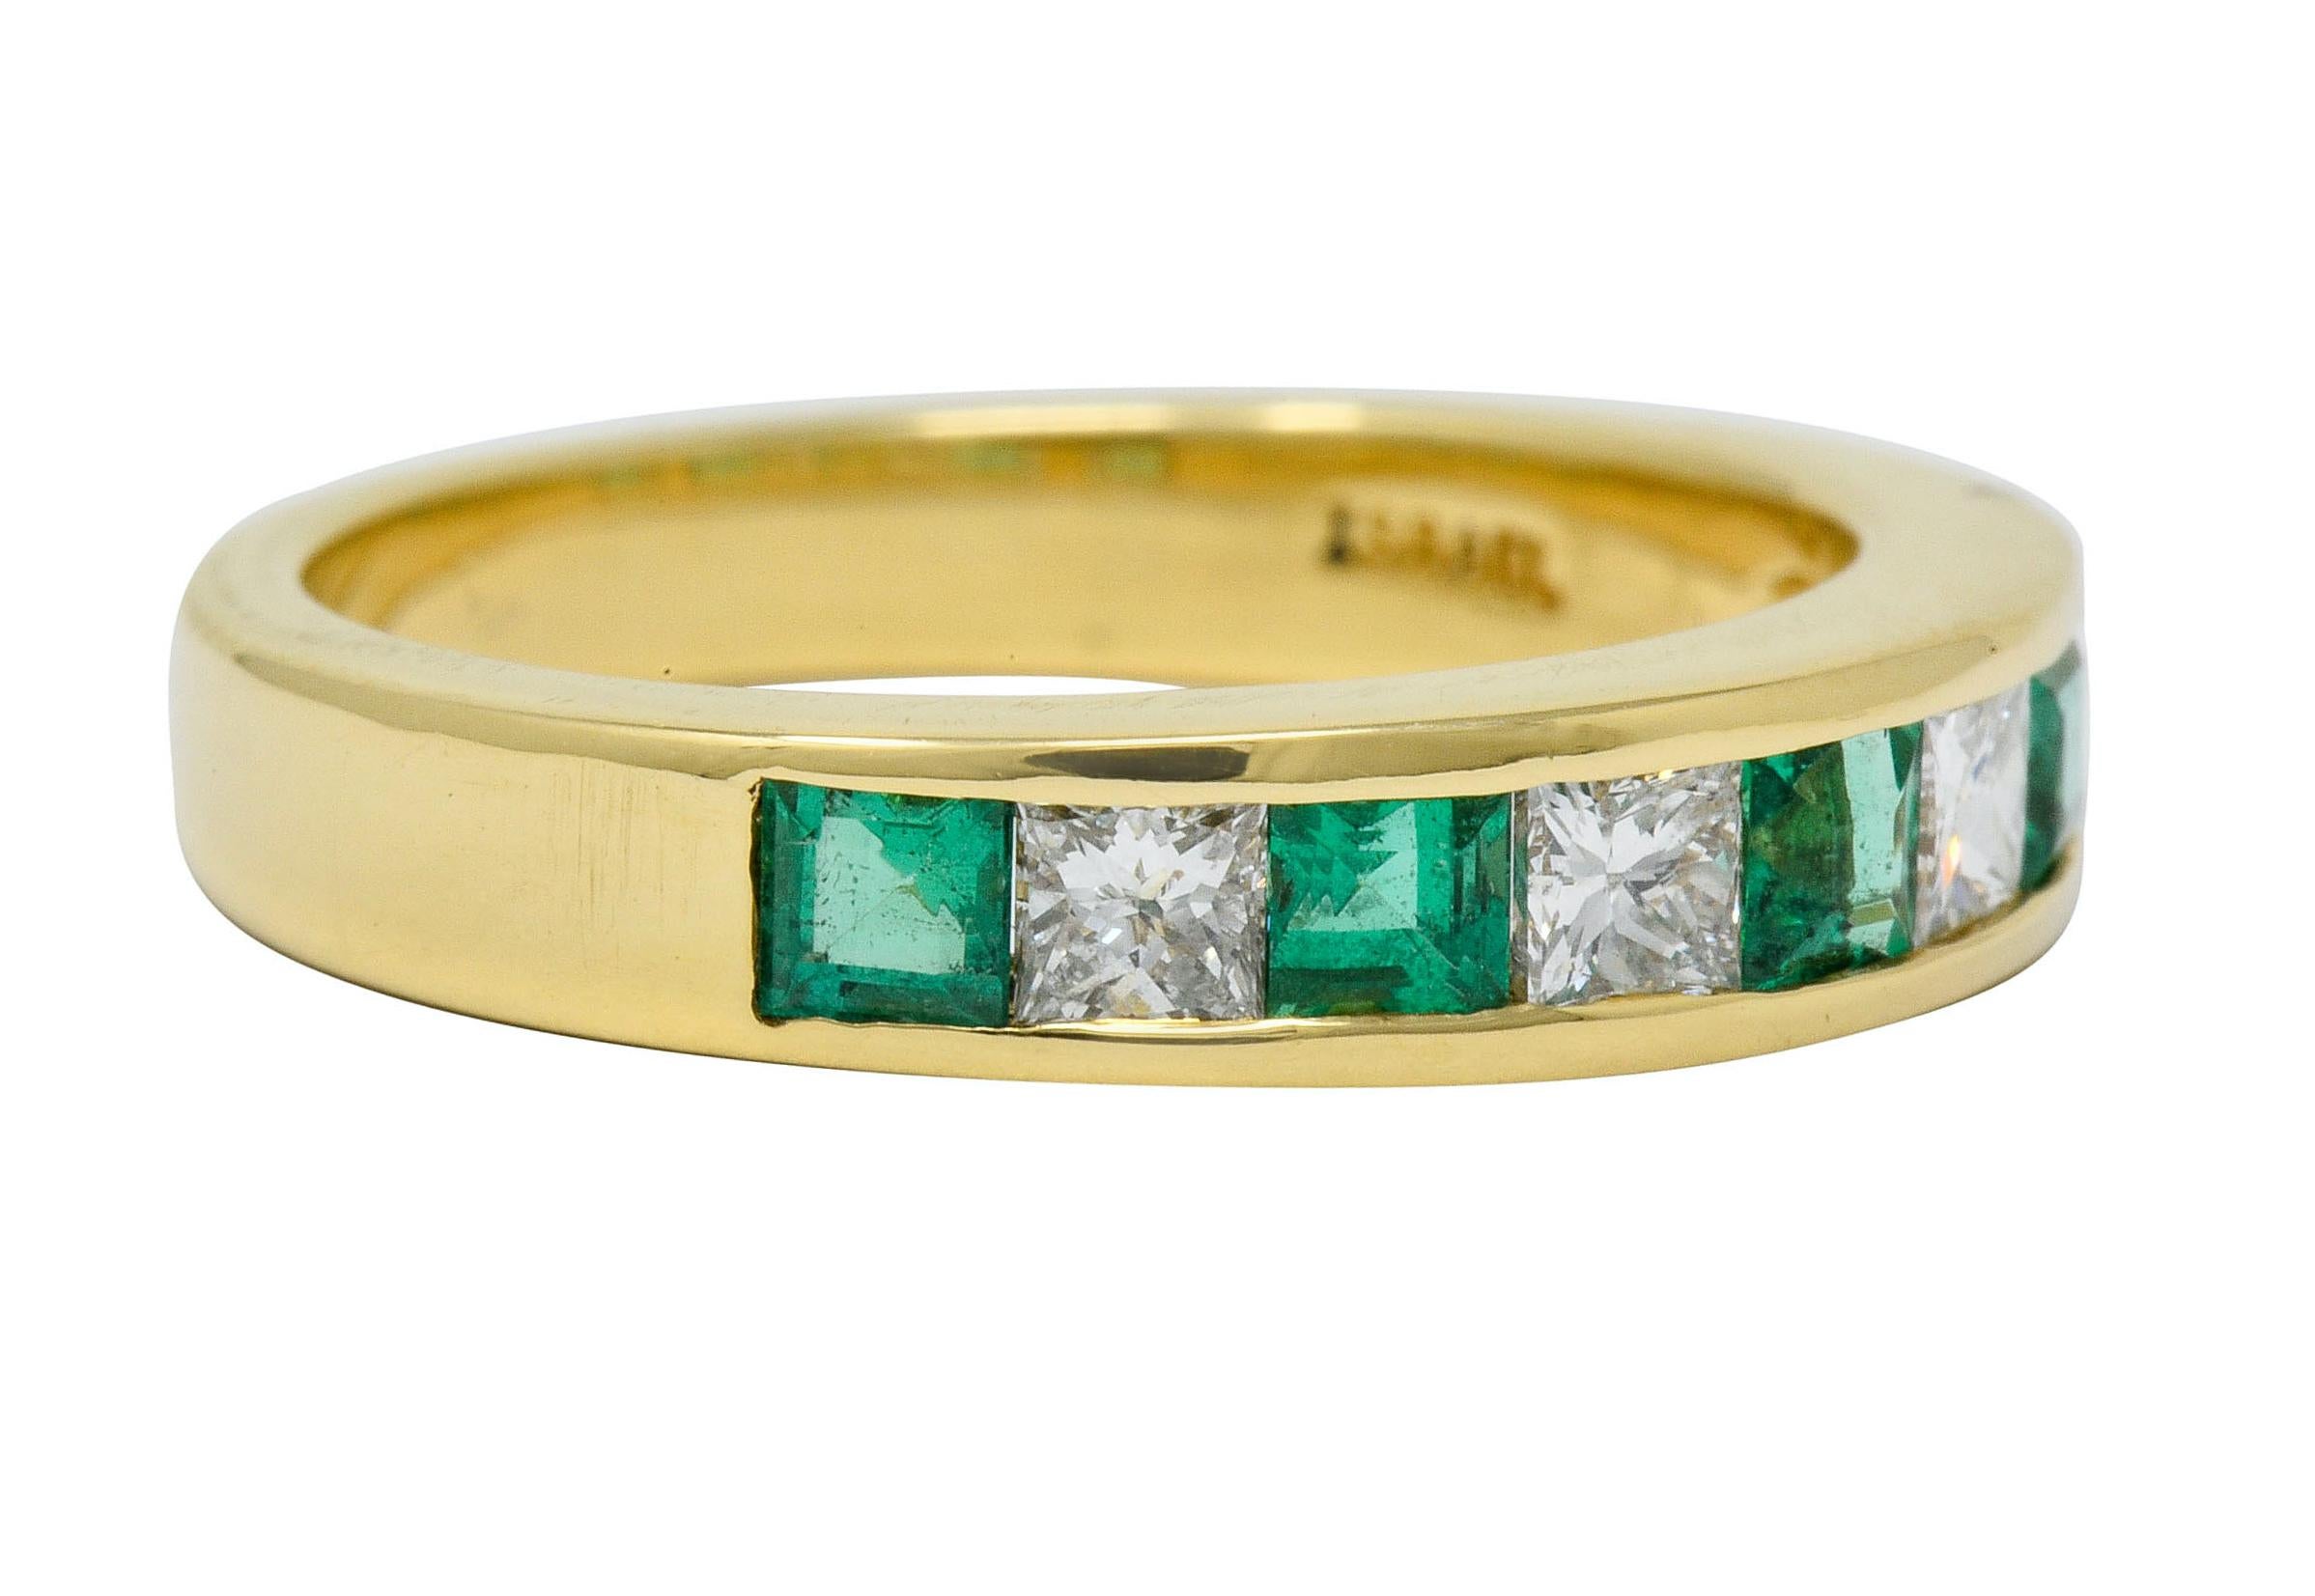 Band ring channel set to front with alternating square cut emerald and princess cut diamonds
Diamonds weigh approximately 0.50 carat total with F/G color and VS clarity

Emeralds are a very well-matched bright green color and weigh approximately